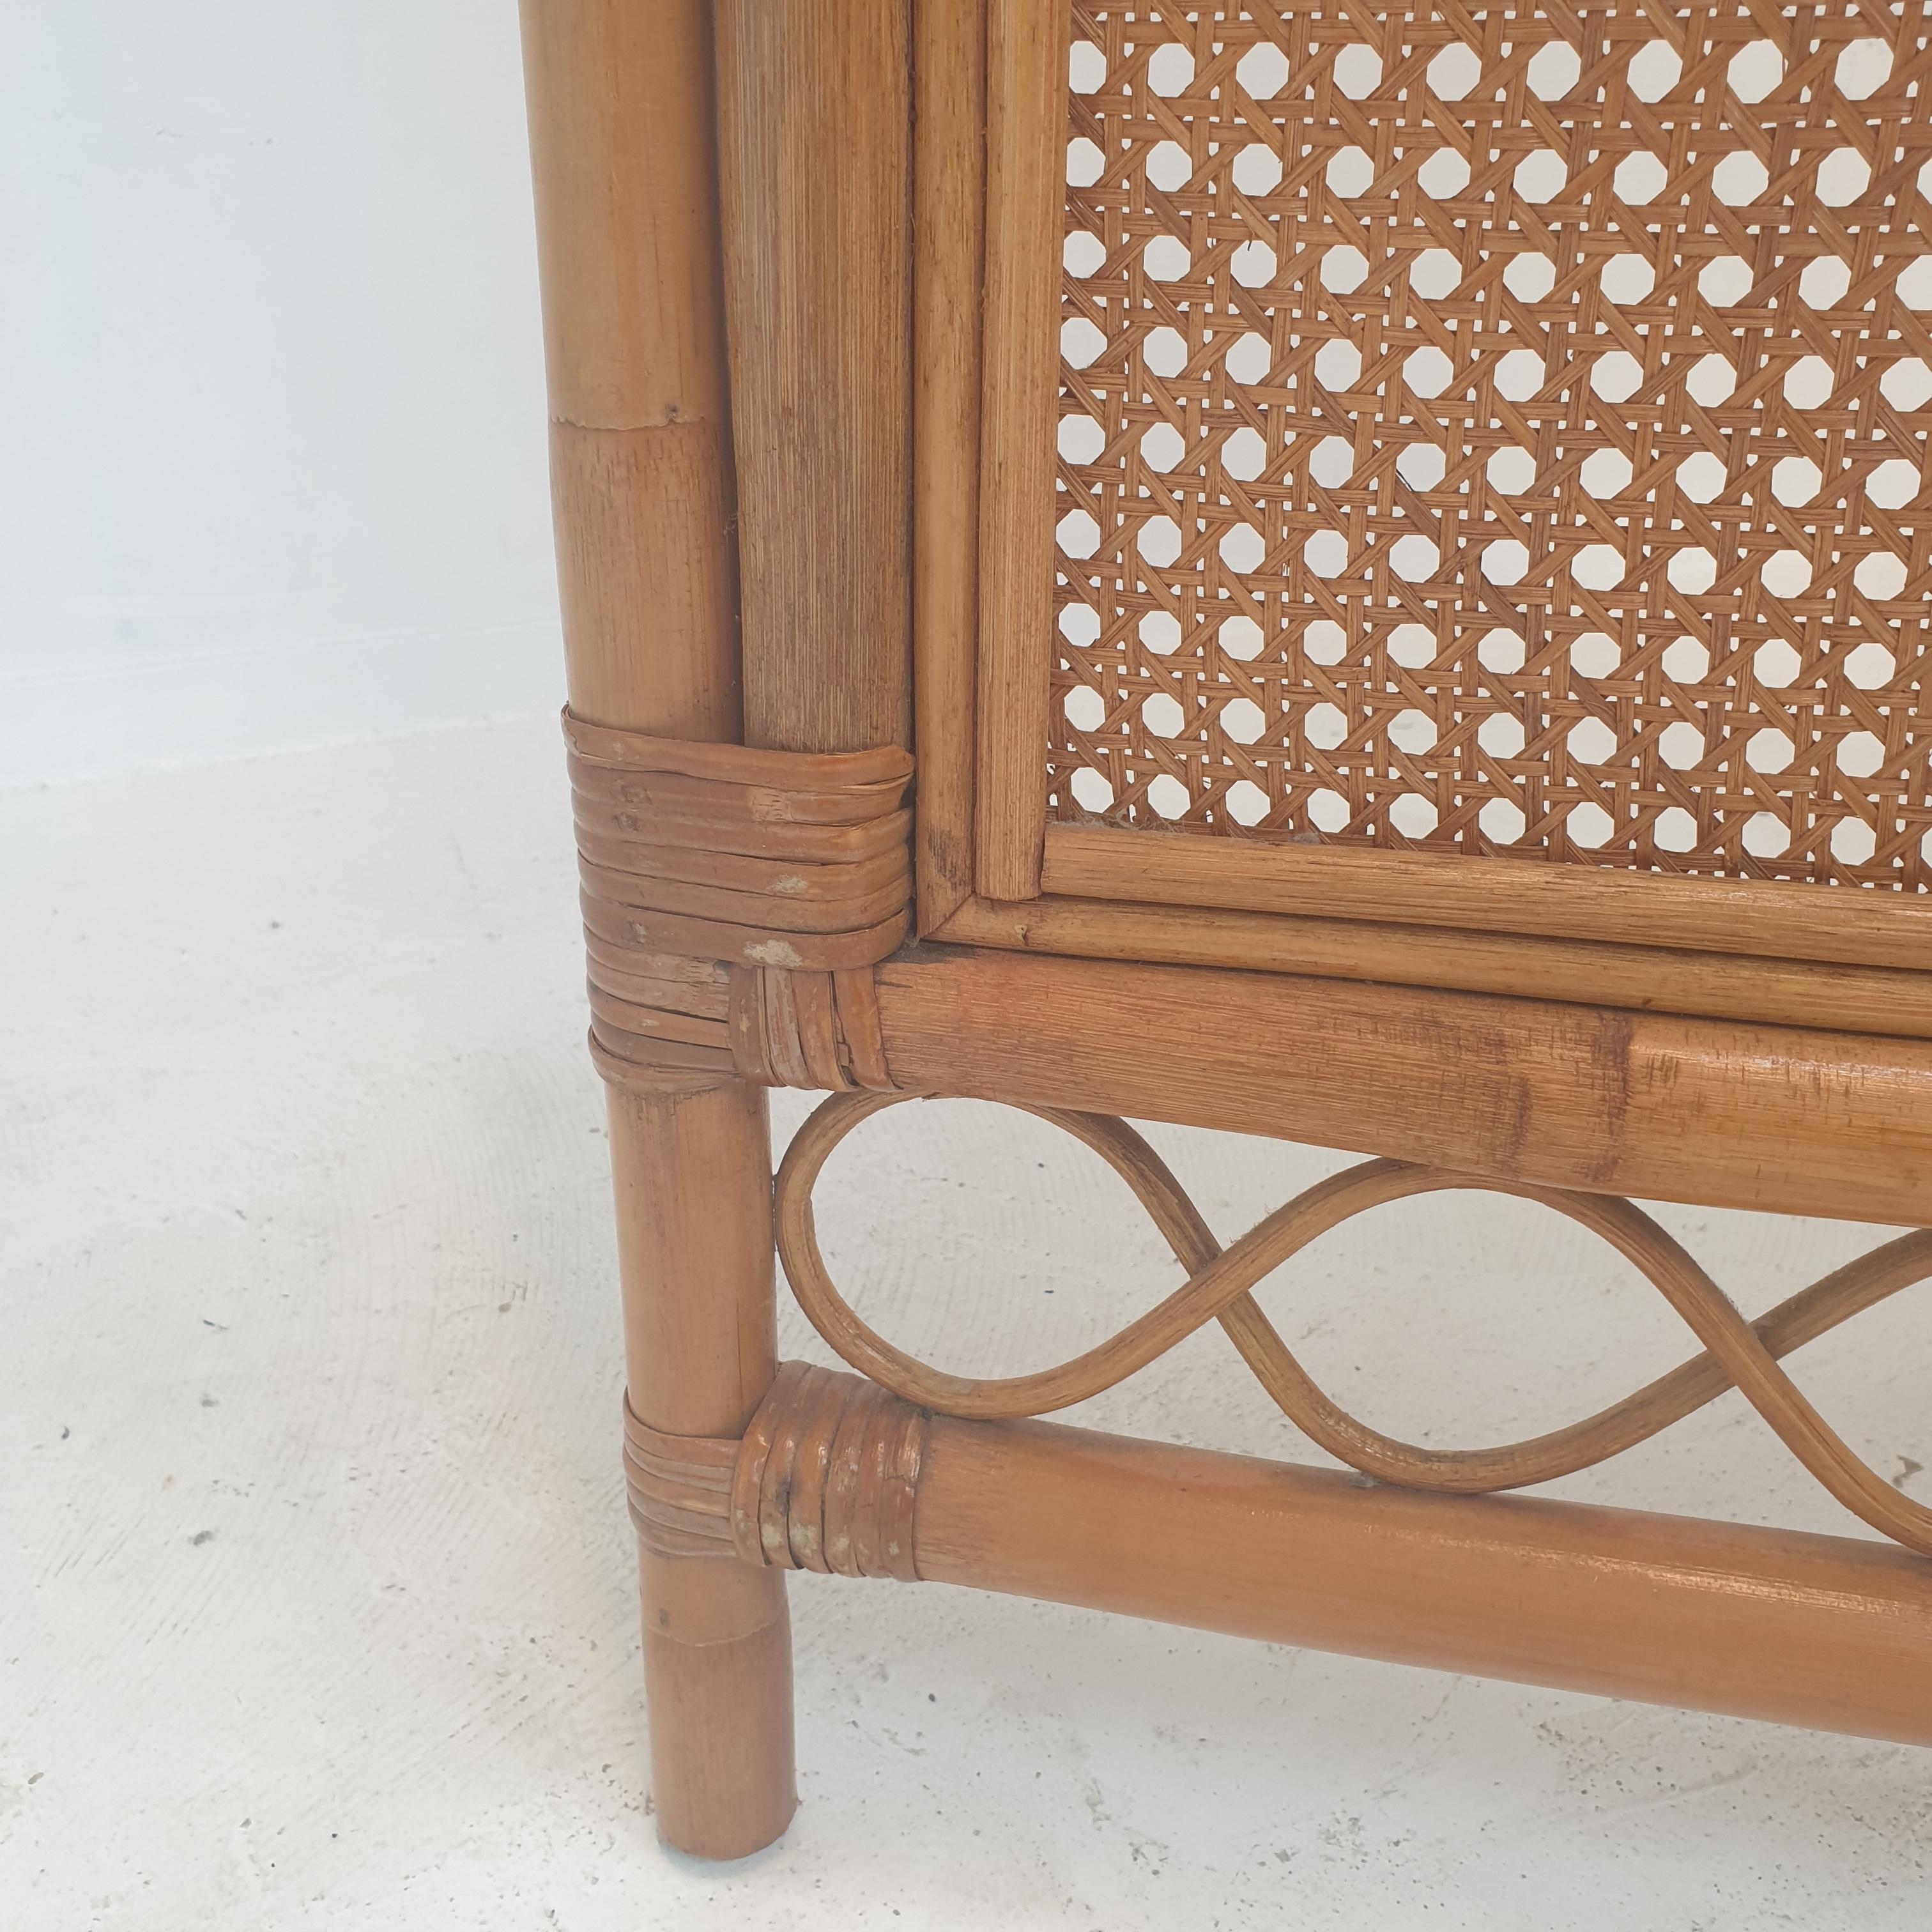 Italian Room Divider in Rattan and Wicker, 1960s For Sale 10